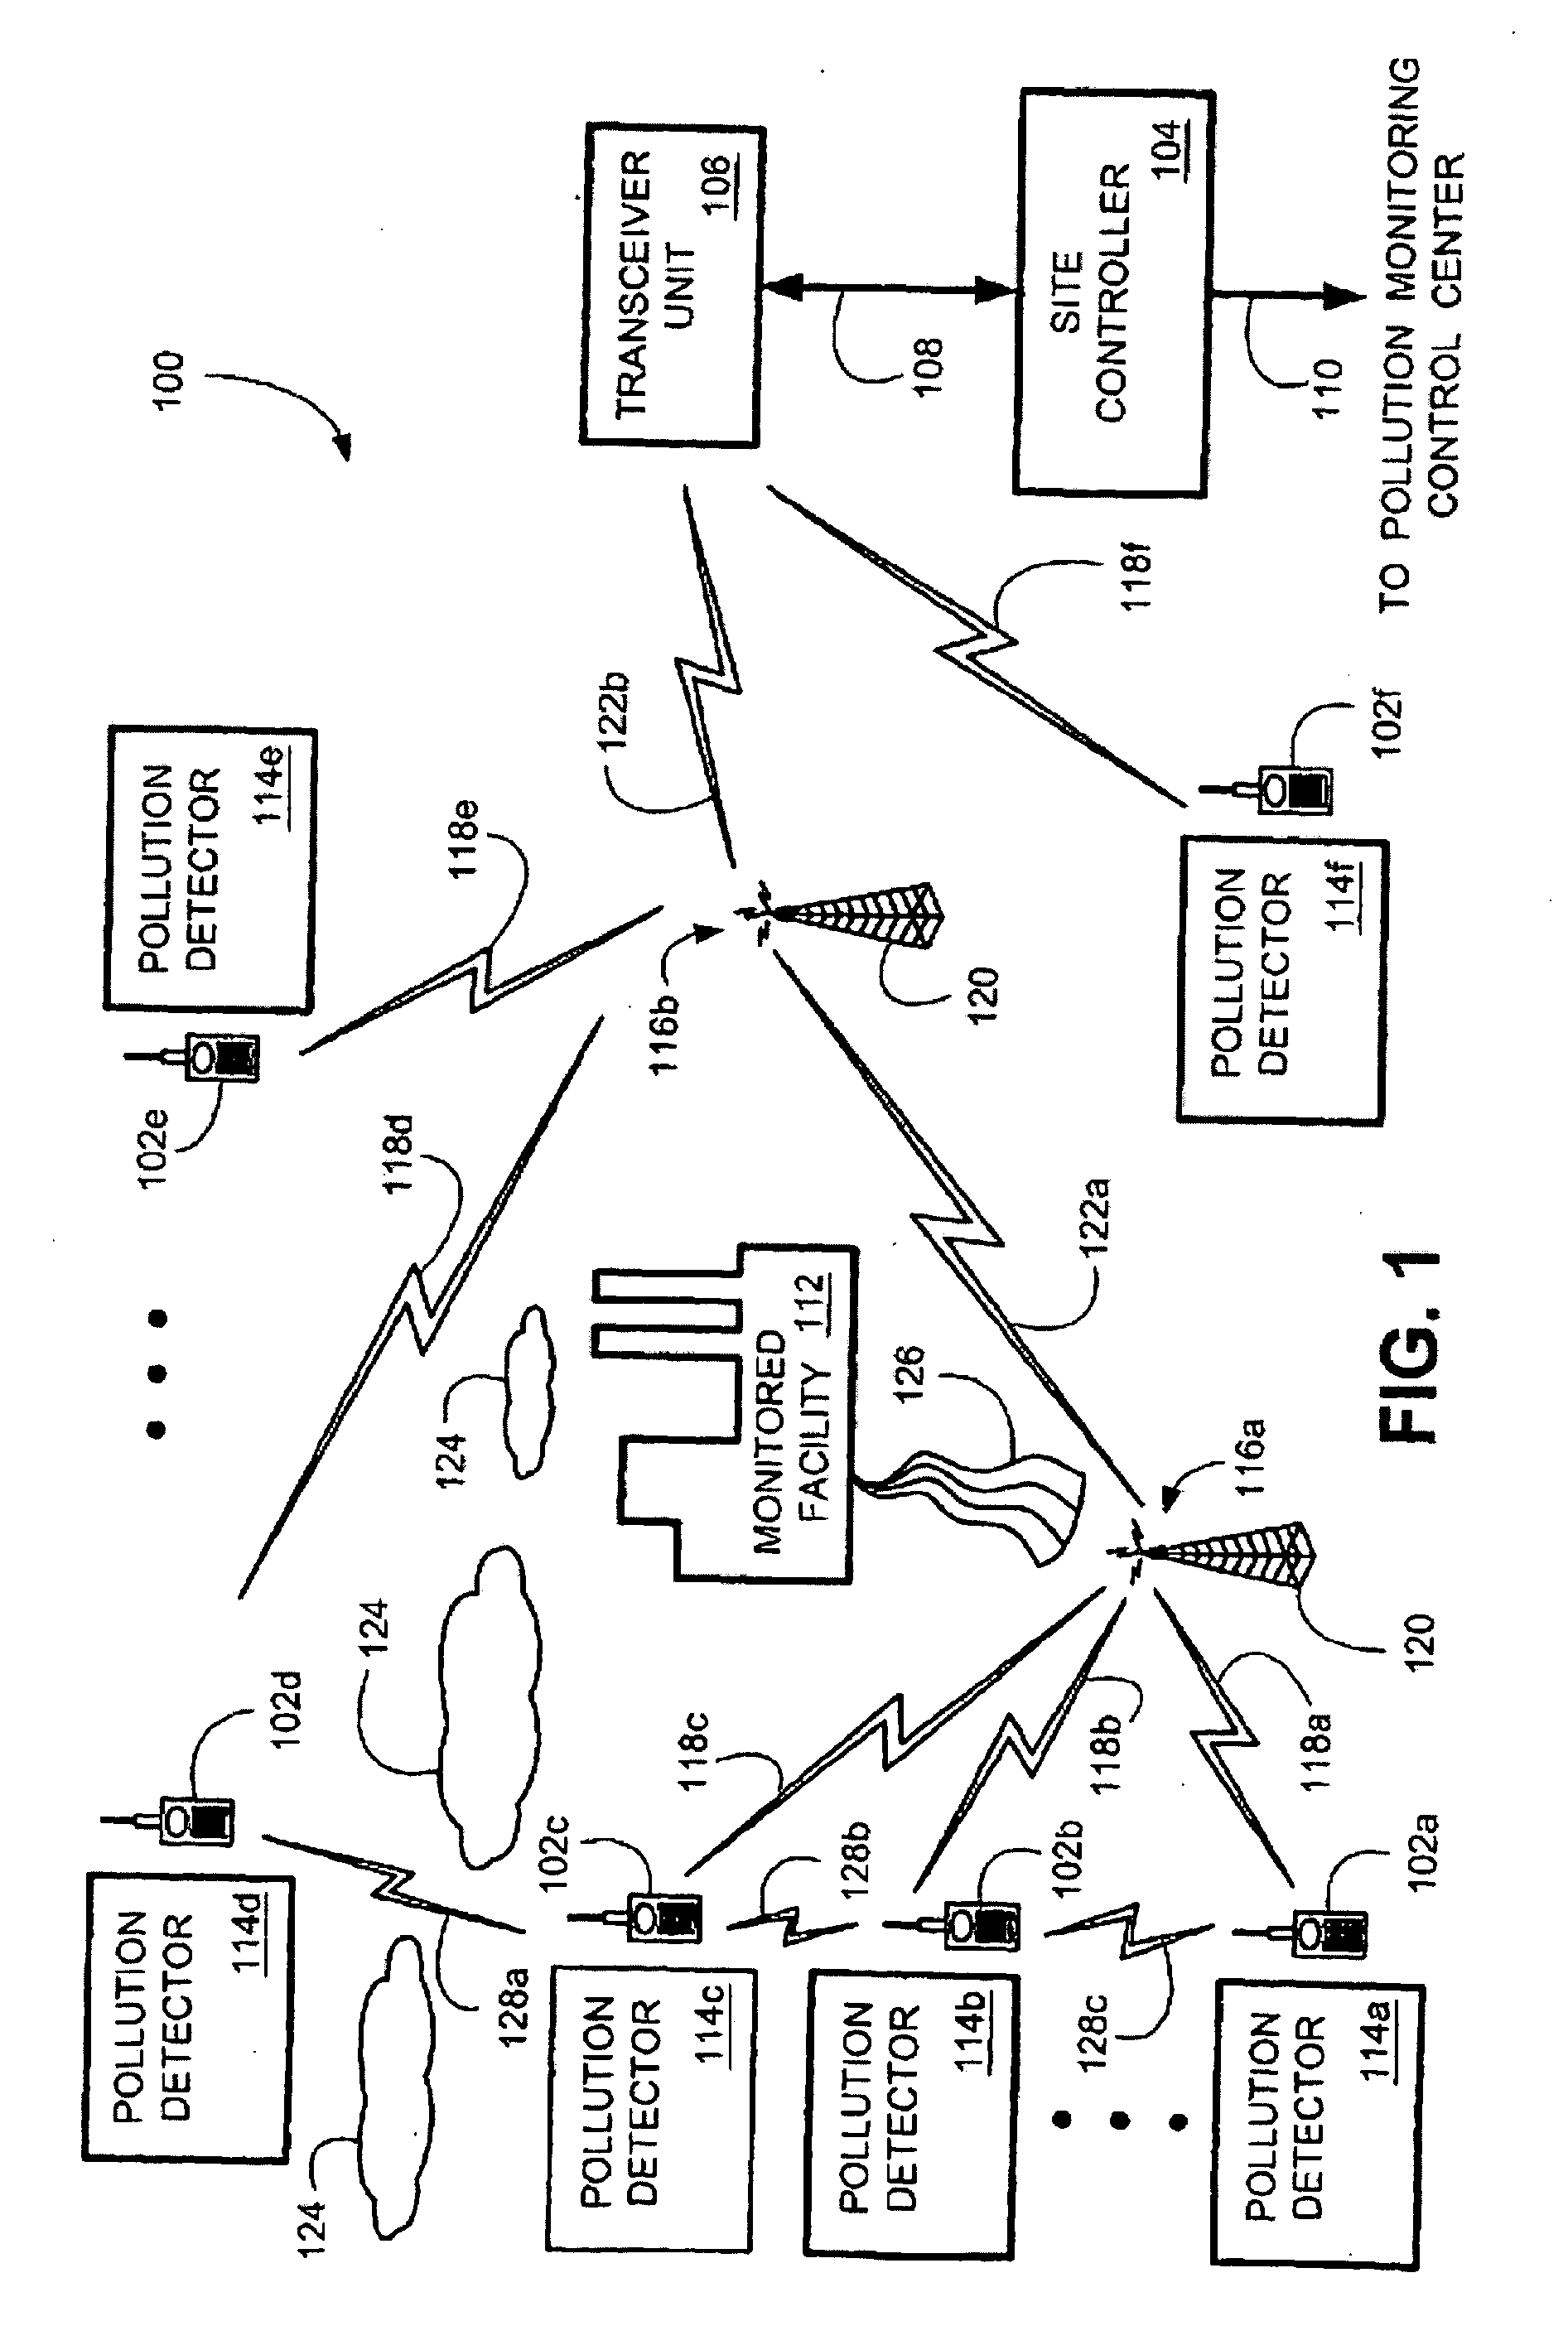 System And Method For Transmitting Pollution Information Over An Integrated Wireless Network